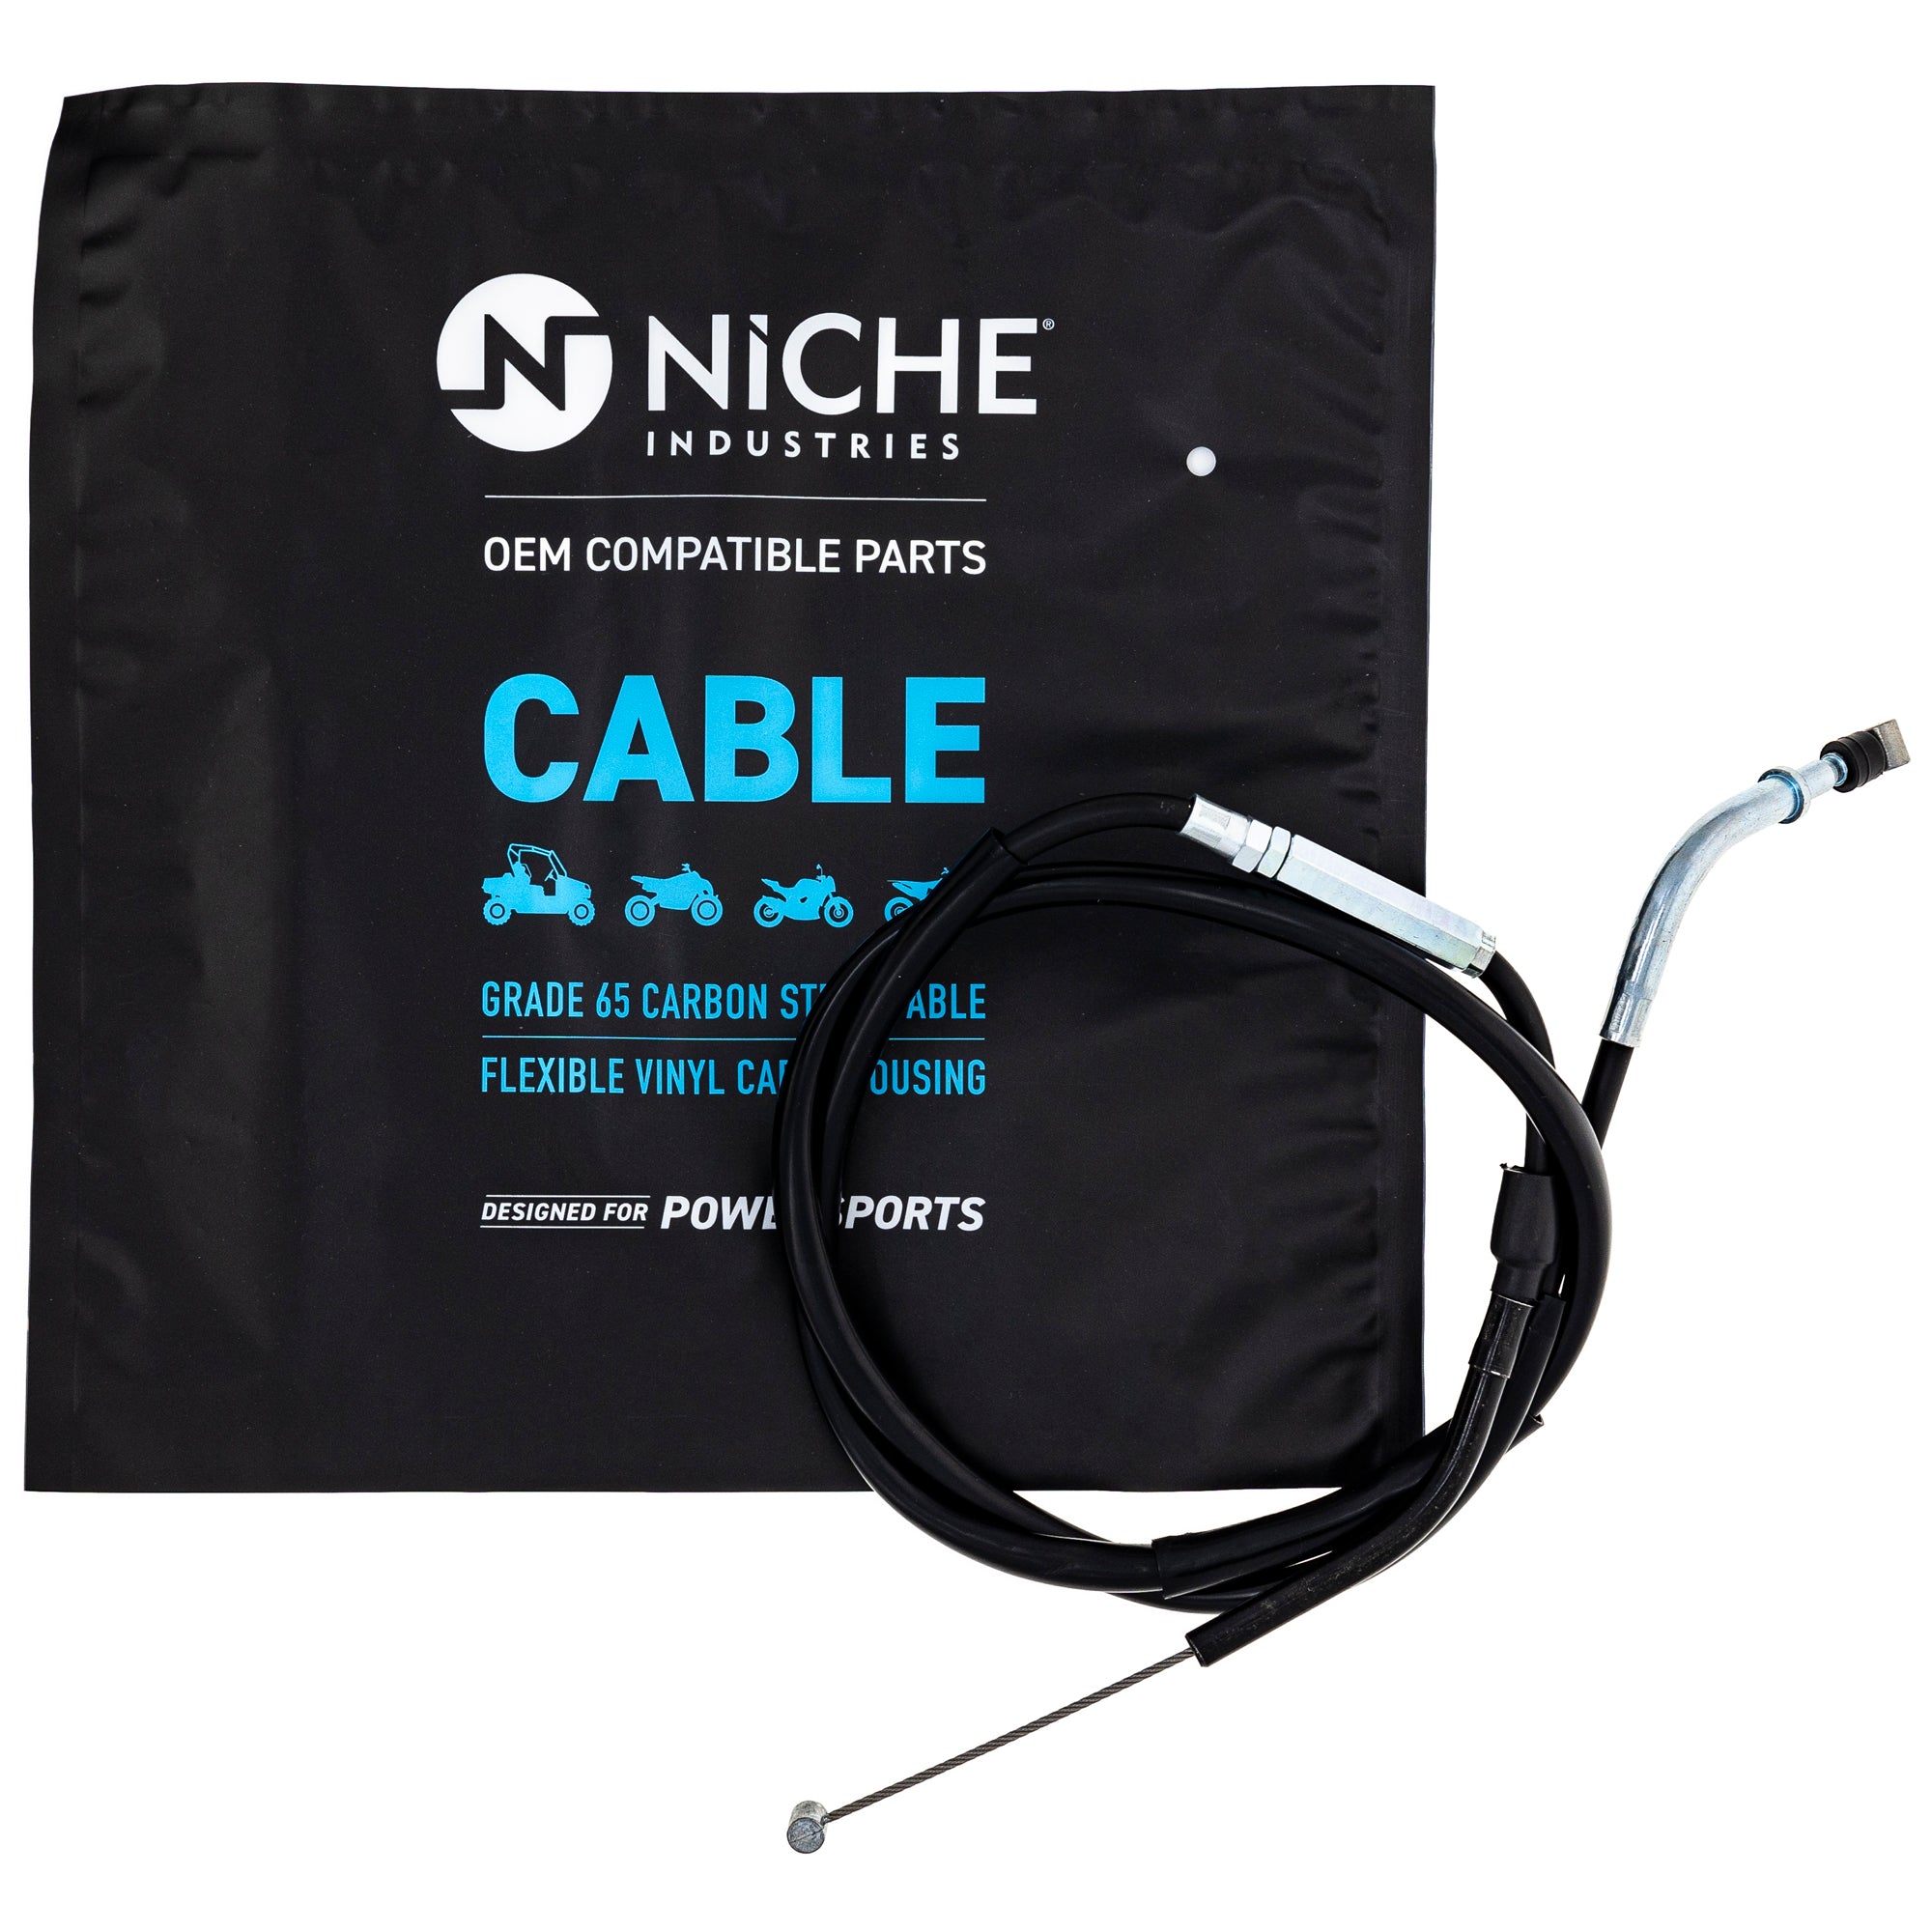 NICHE 519-CCB2343L Clutch Cable for zOTHER Arctic Cat Textron